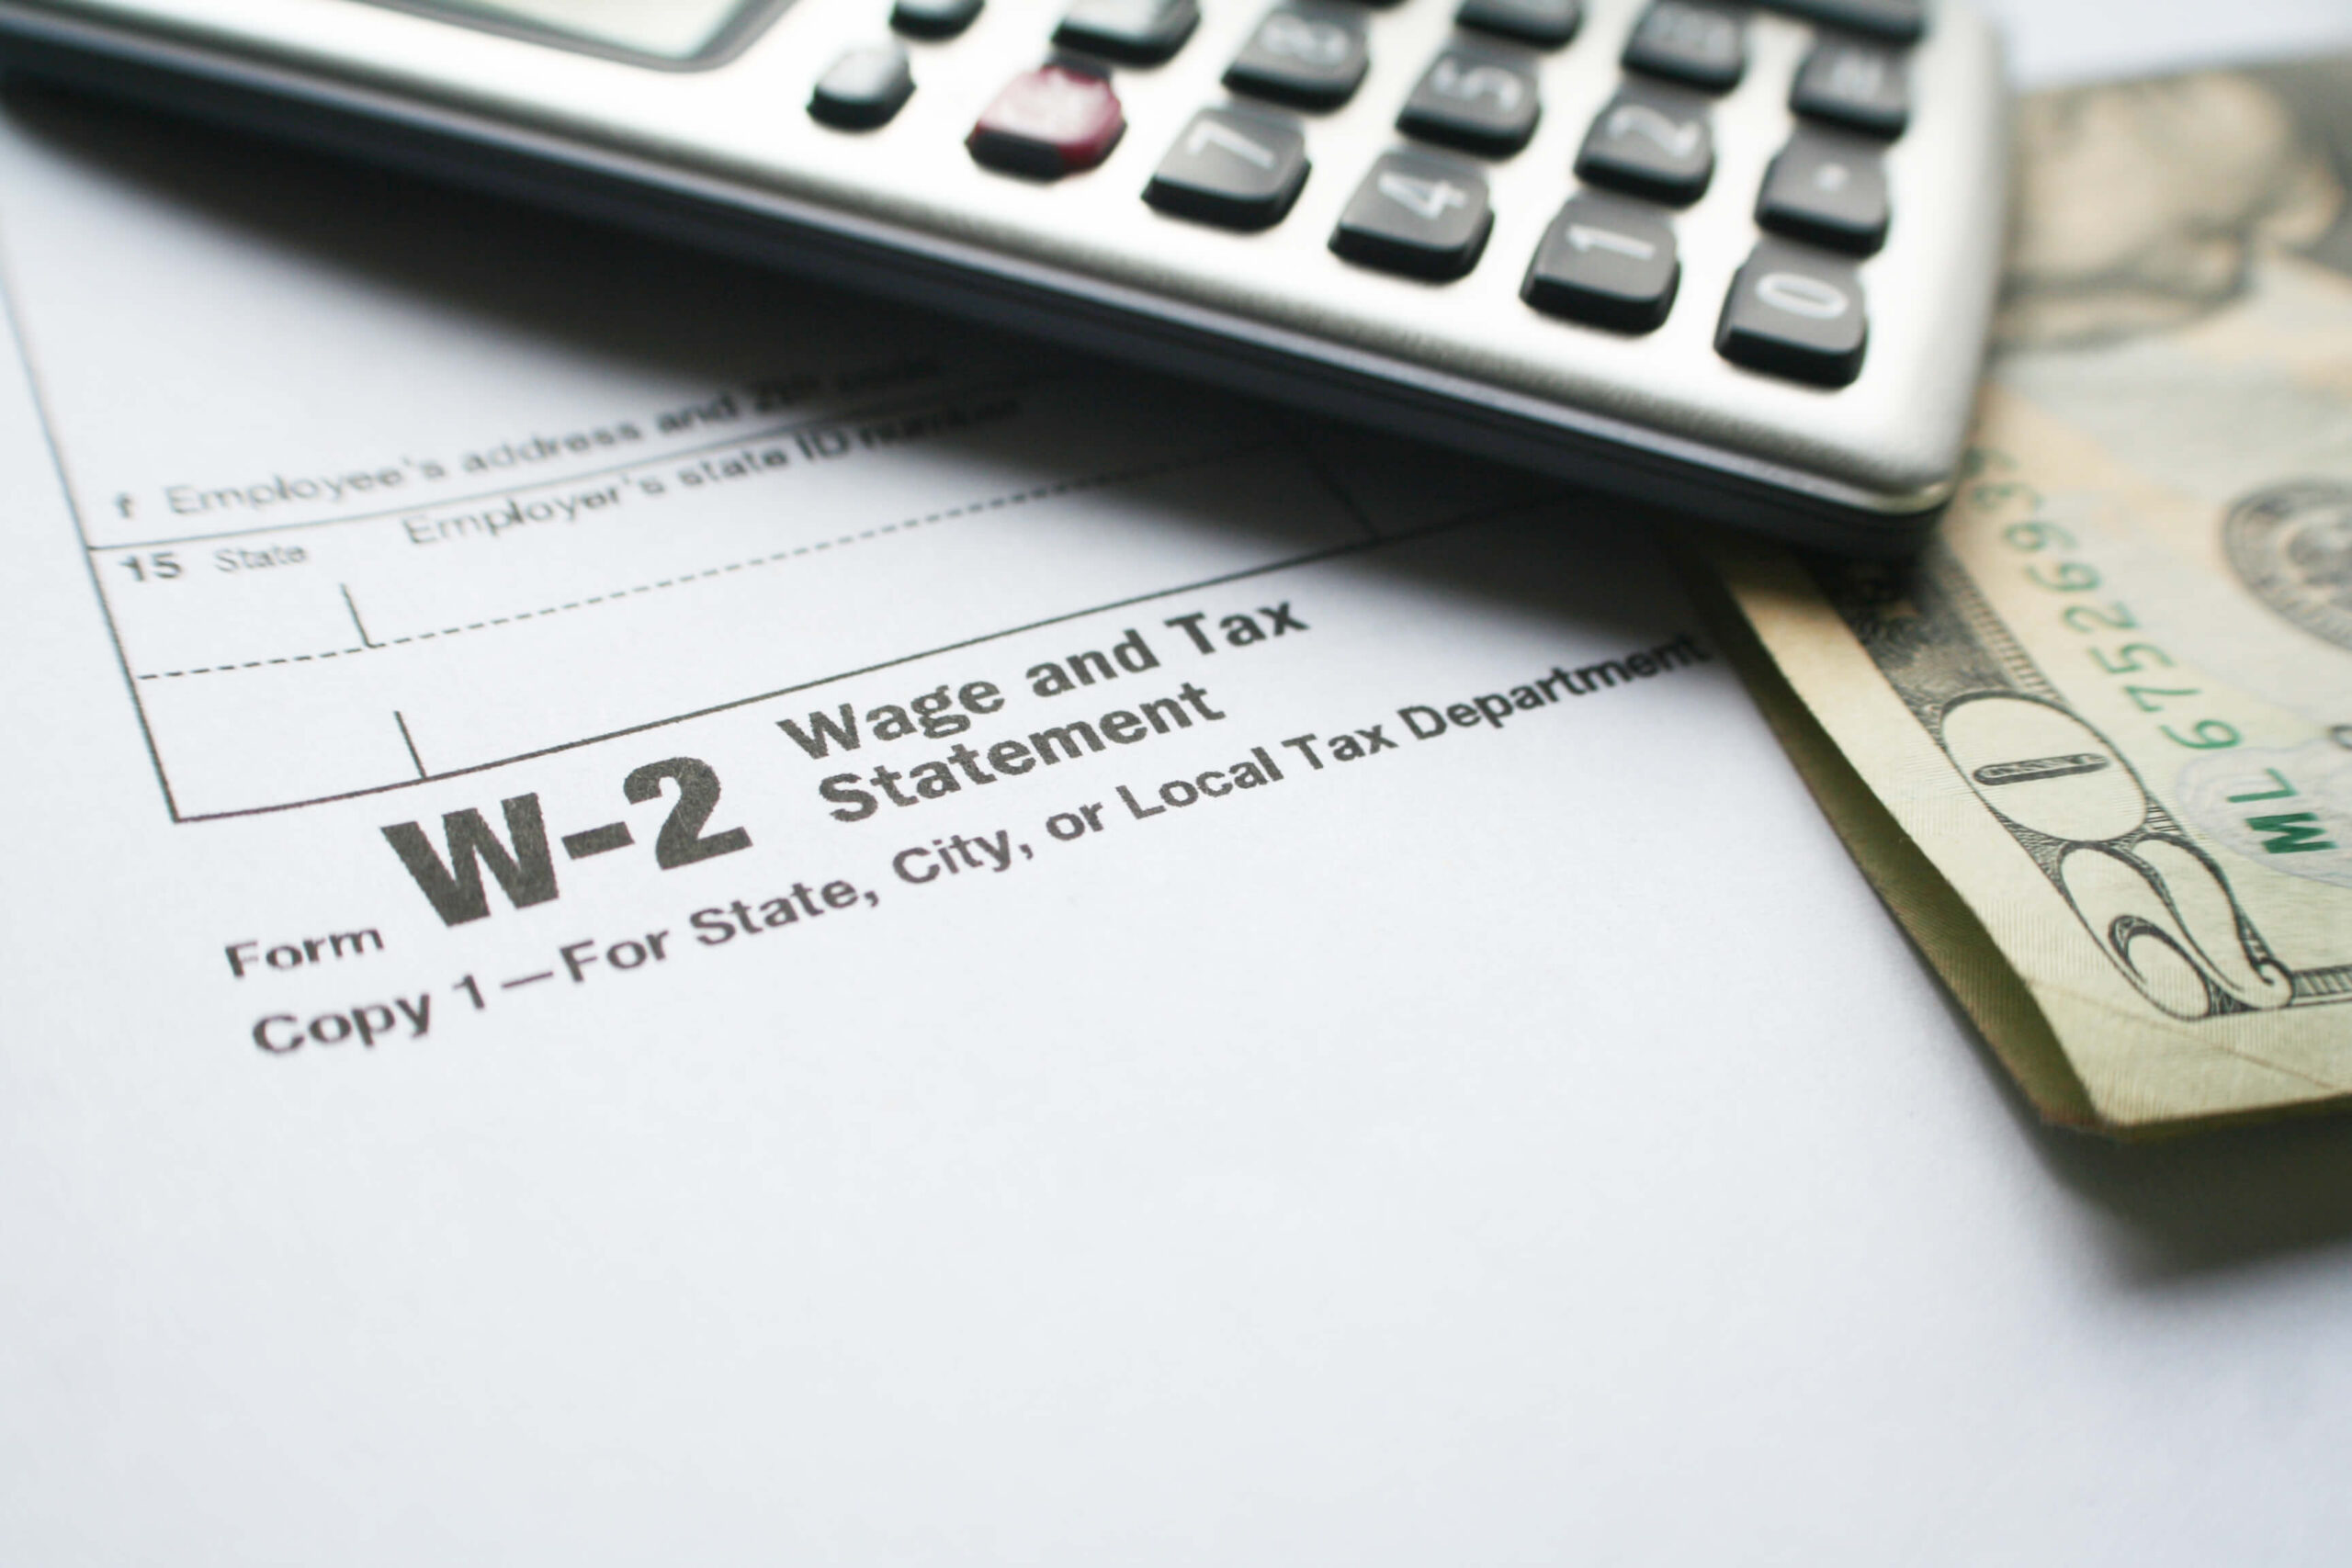 What is a W-2 attack?